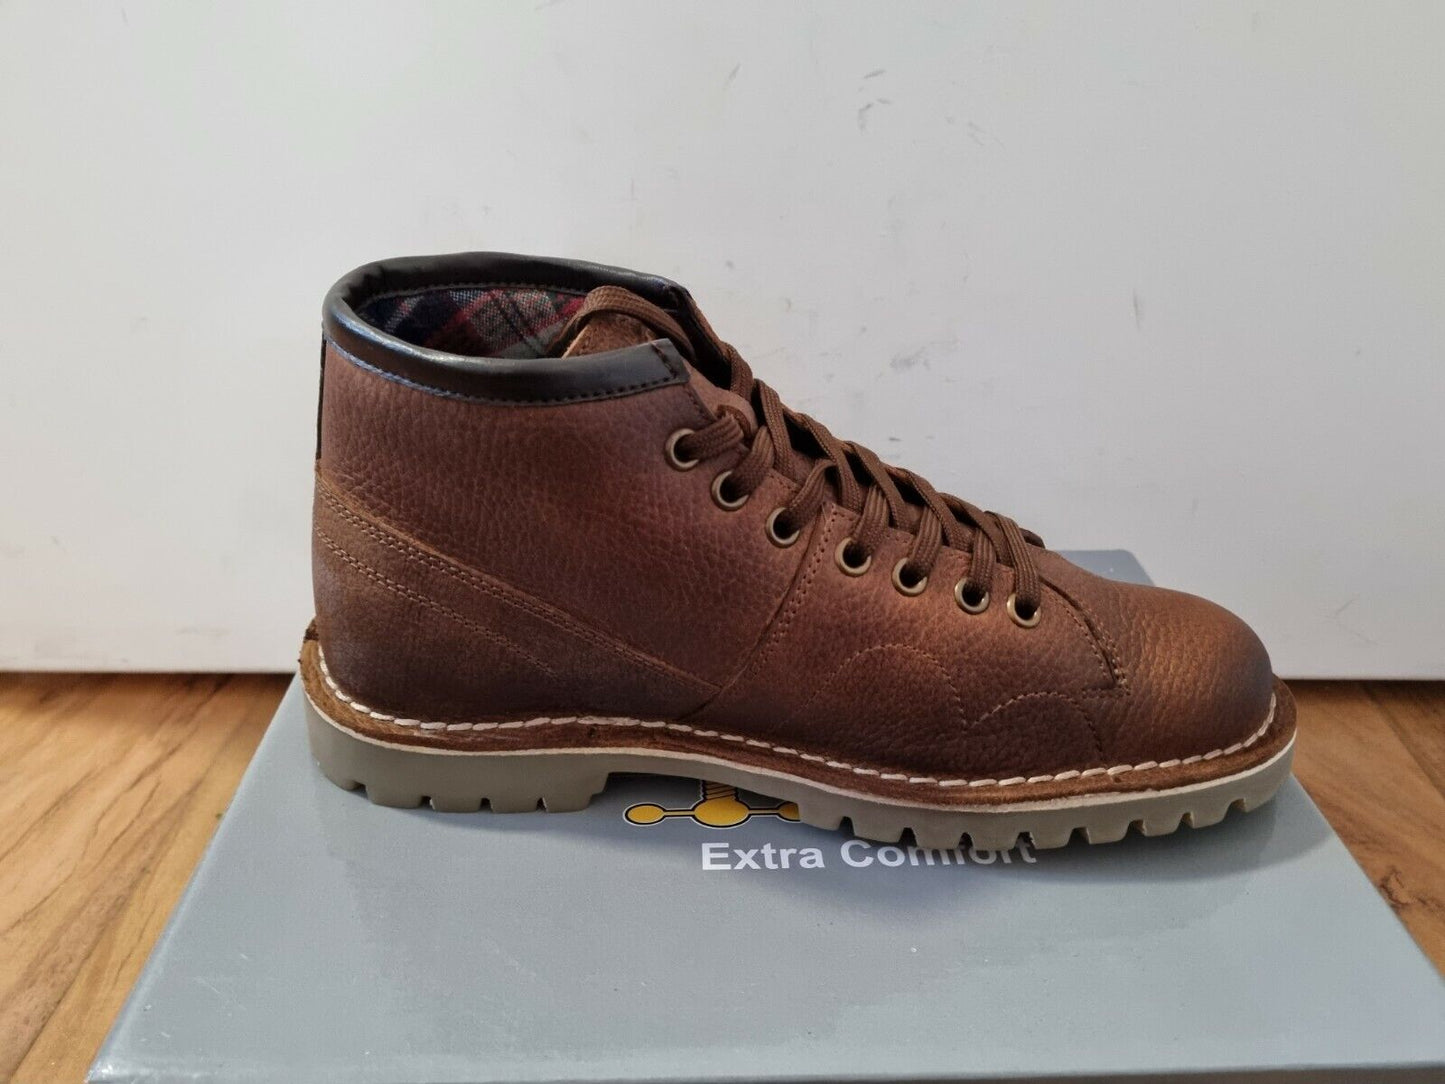 Monkey Boot by Grafters - Heritage Range - Light Brown Leather (M430GB)